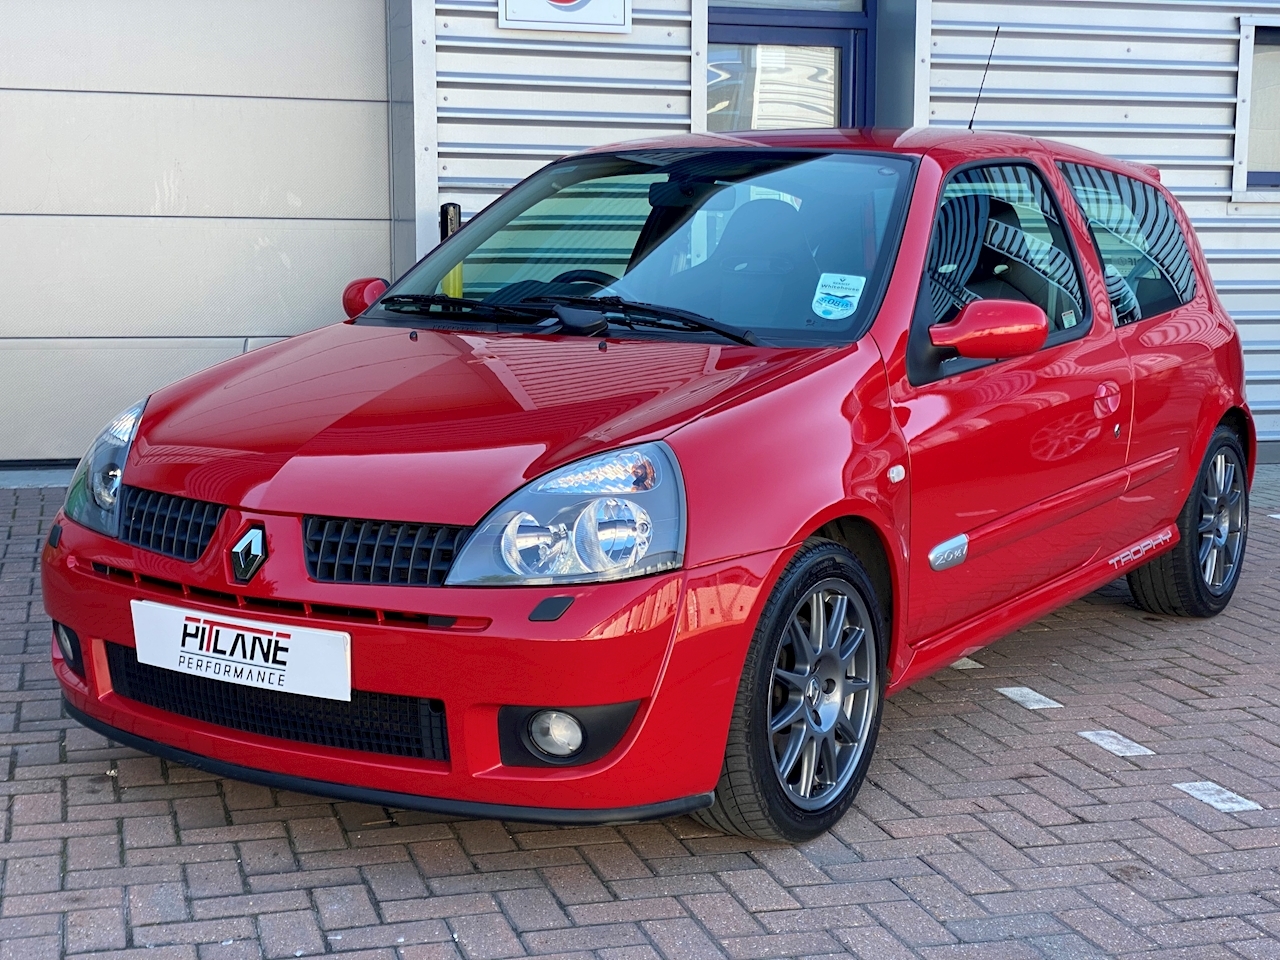 Used 2005 Renault Clio Renaultsport Trophy For Sale (U287)